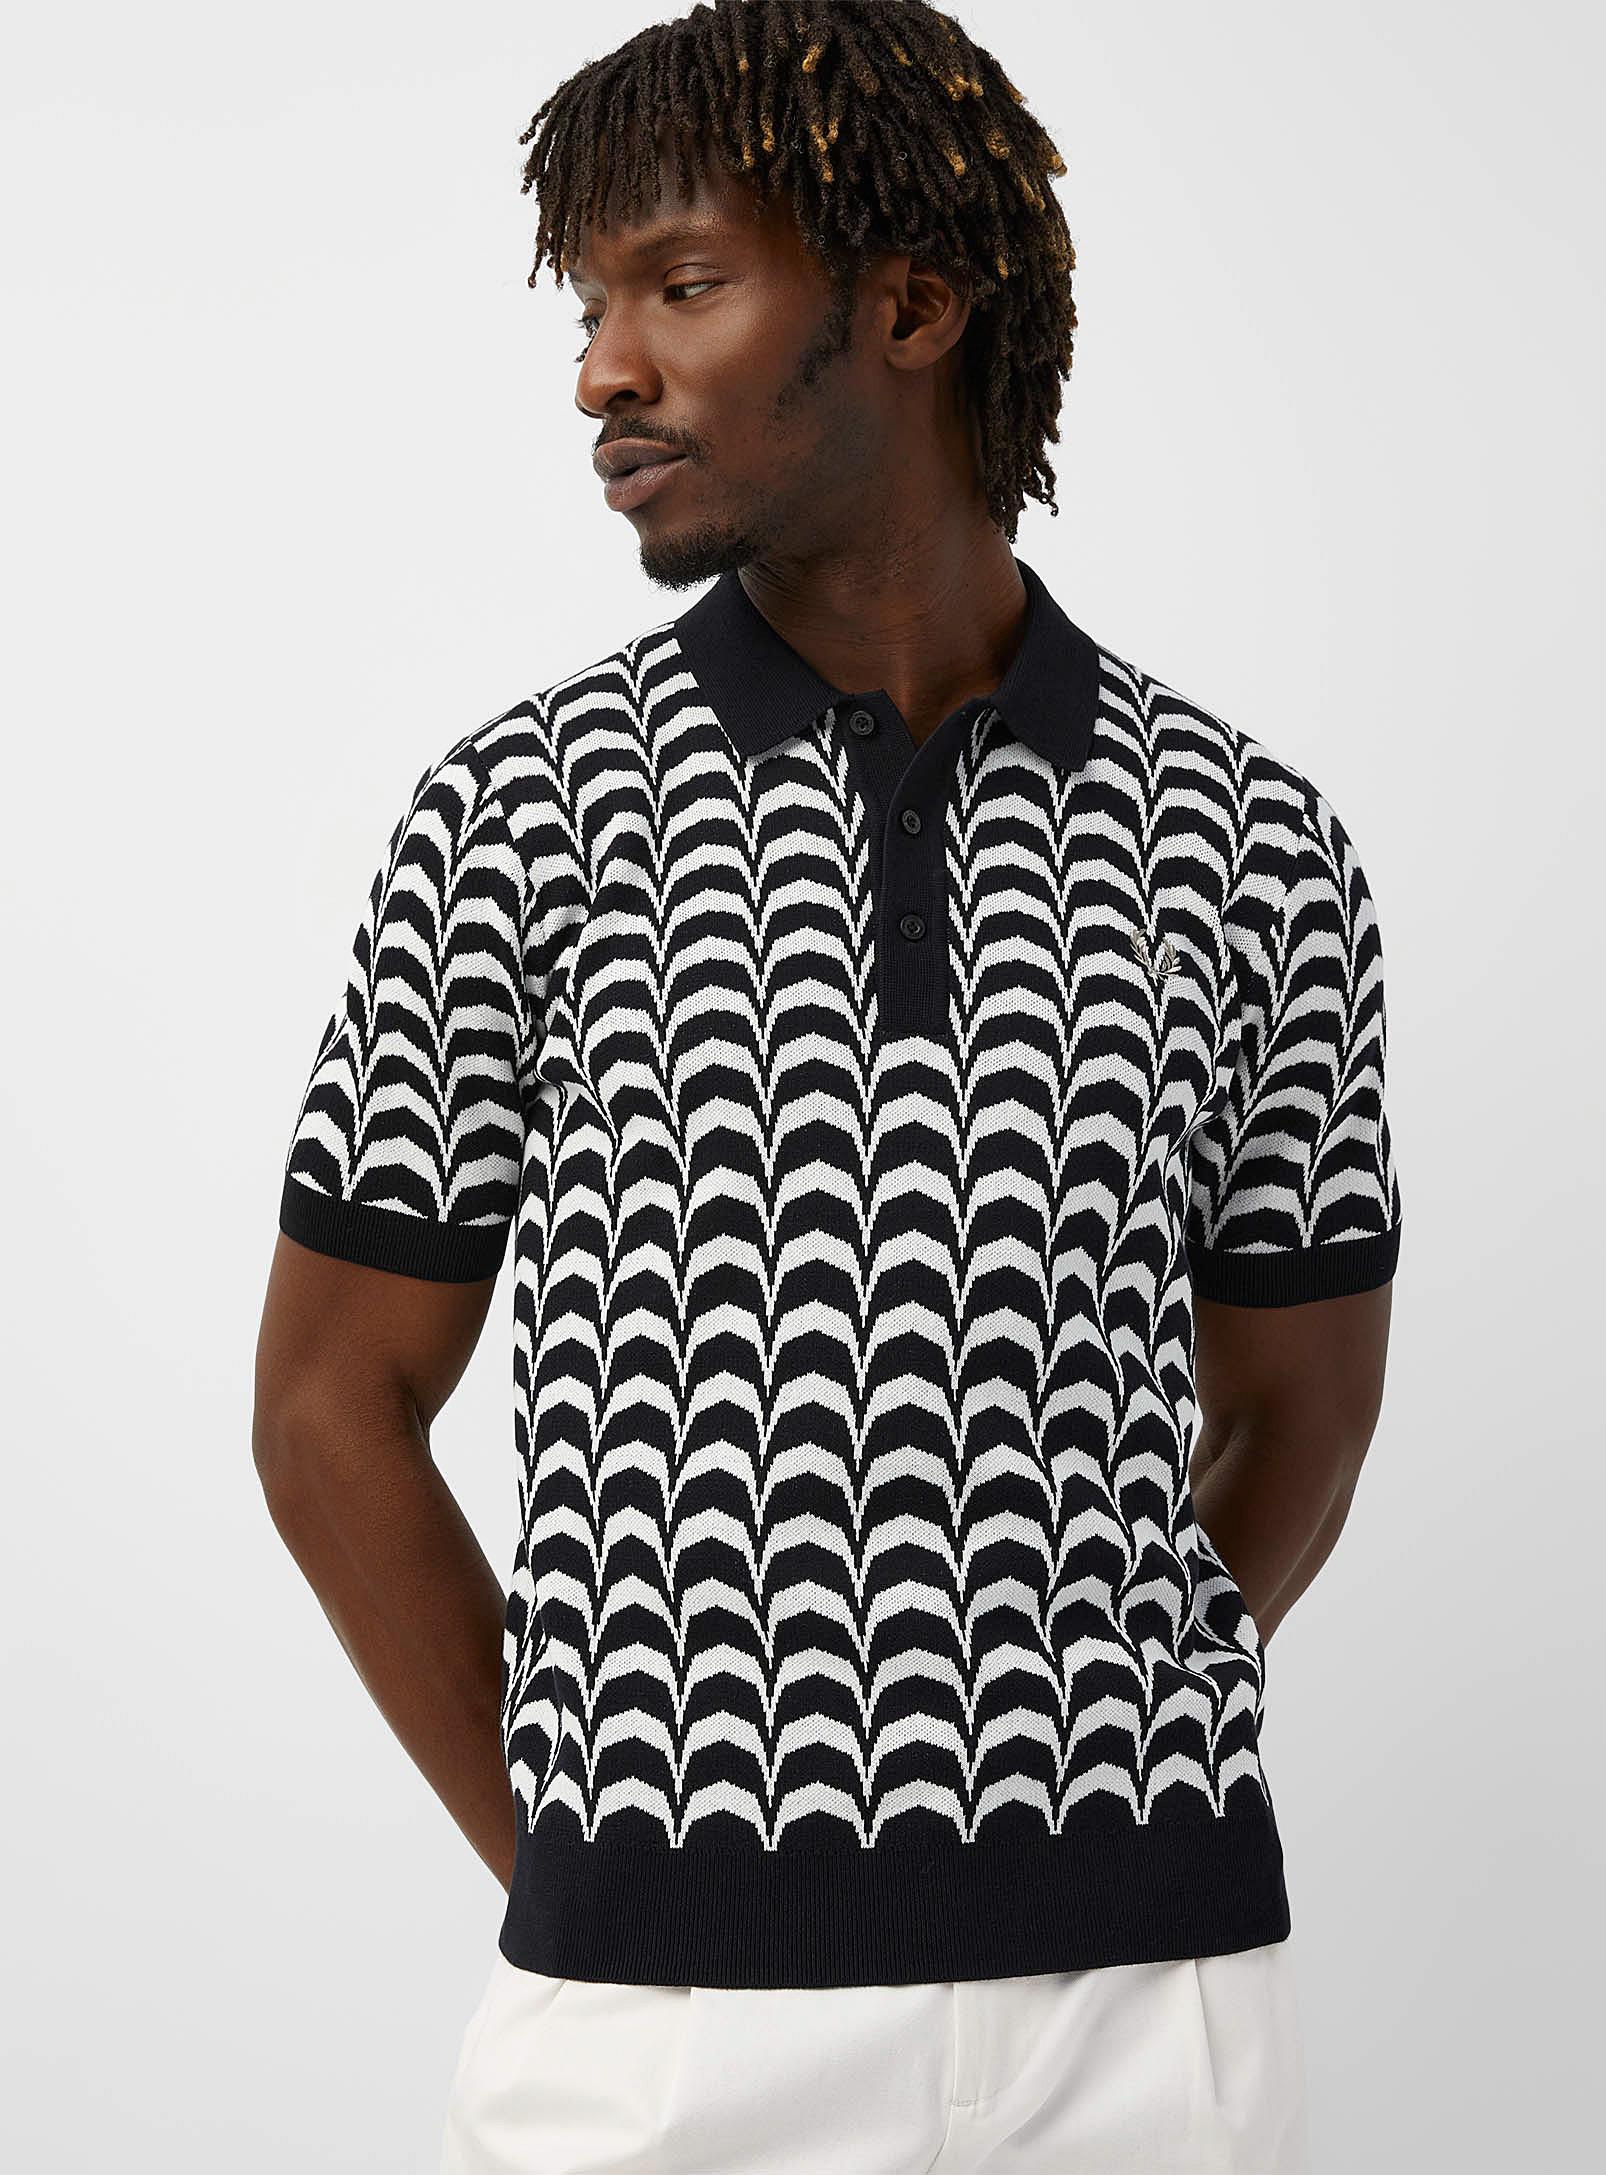 Fred Perry - Le polo tricot jacquard contraste